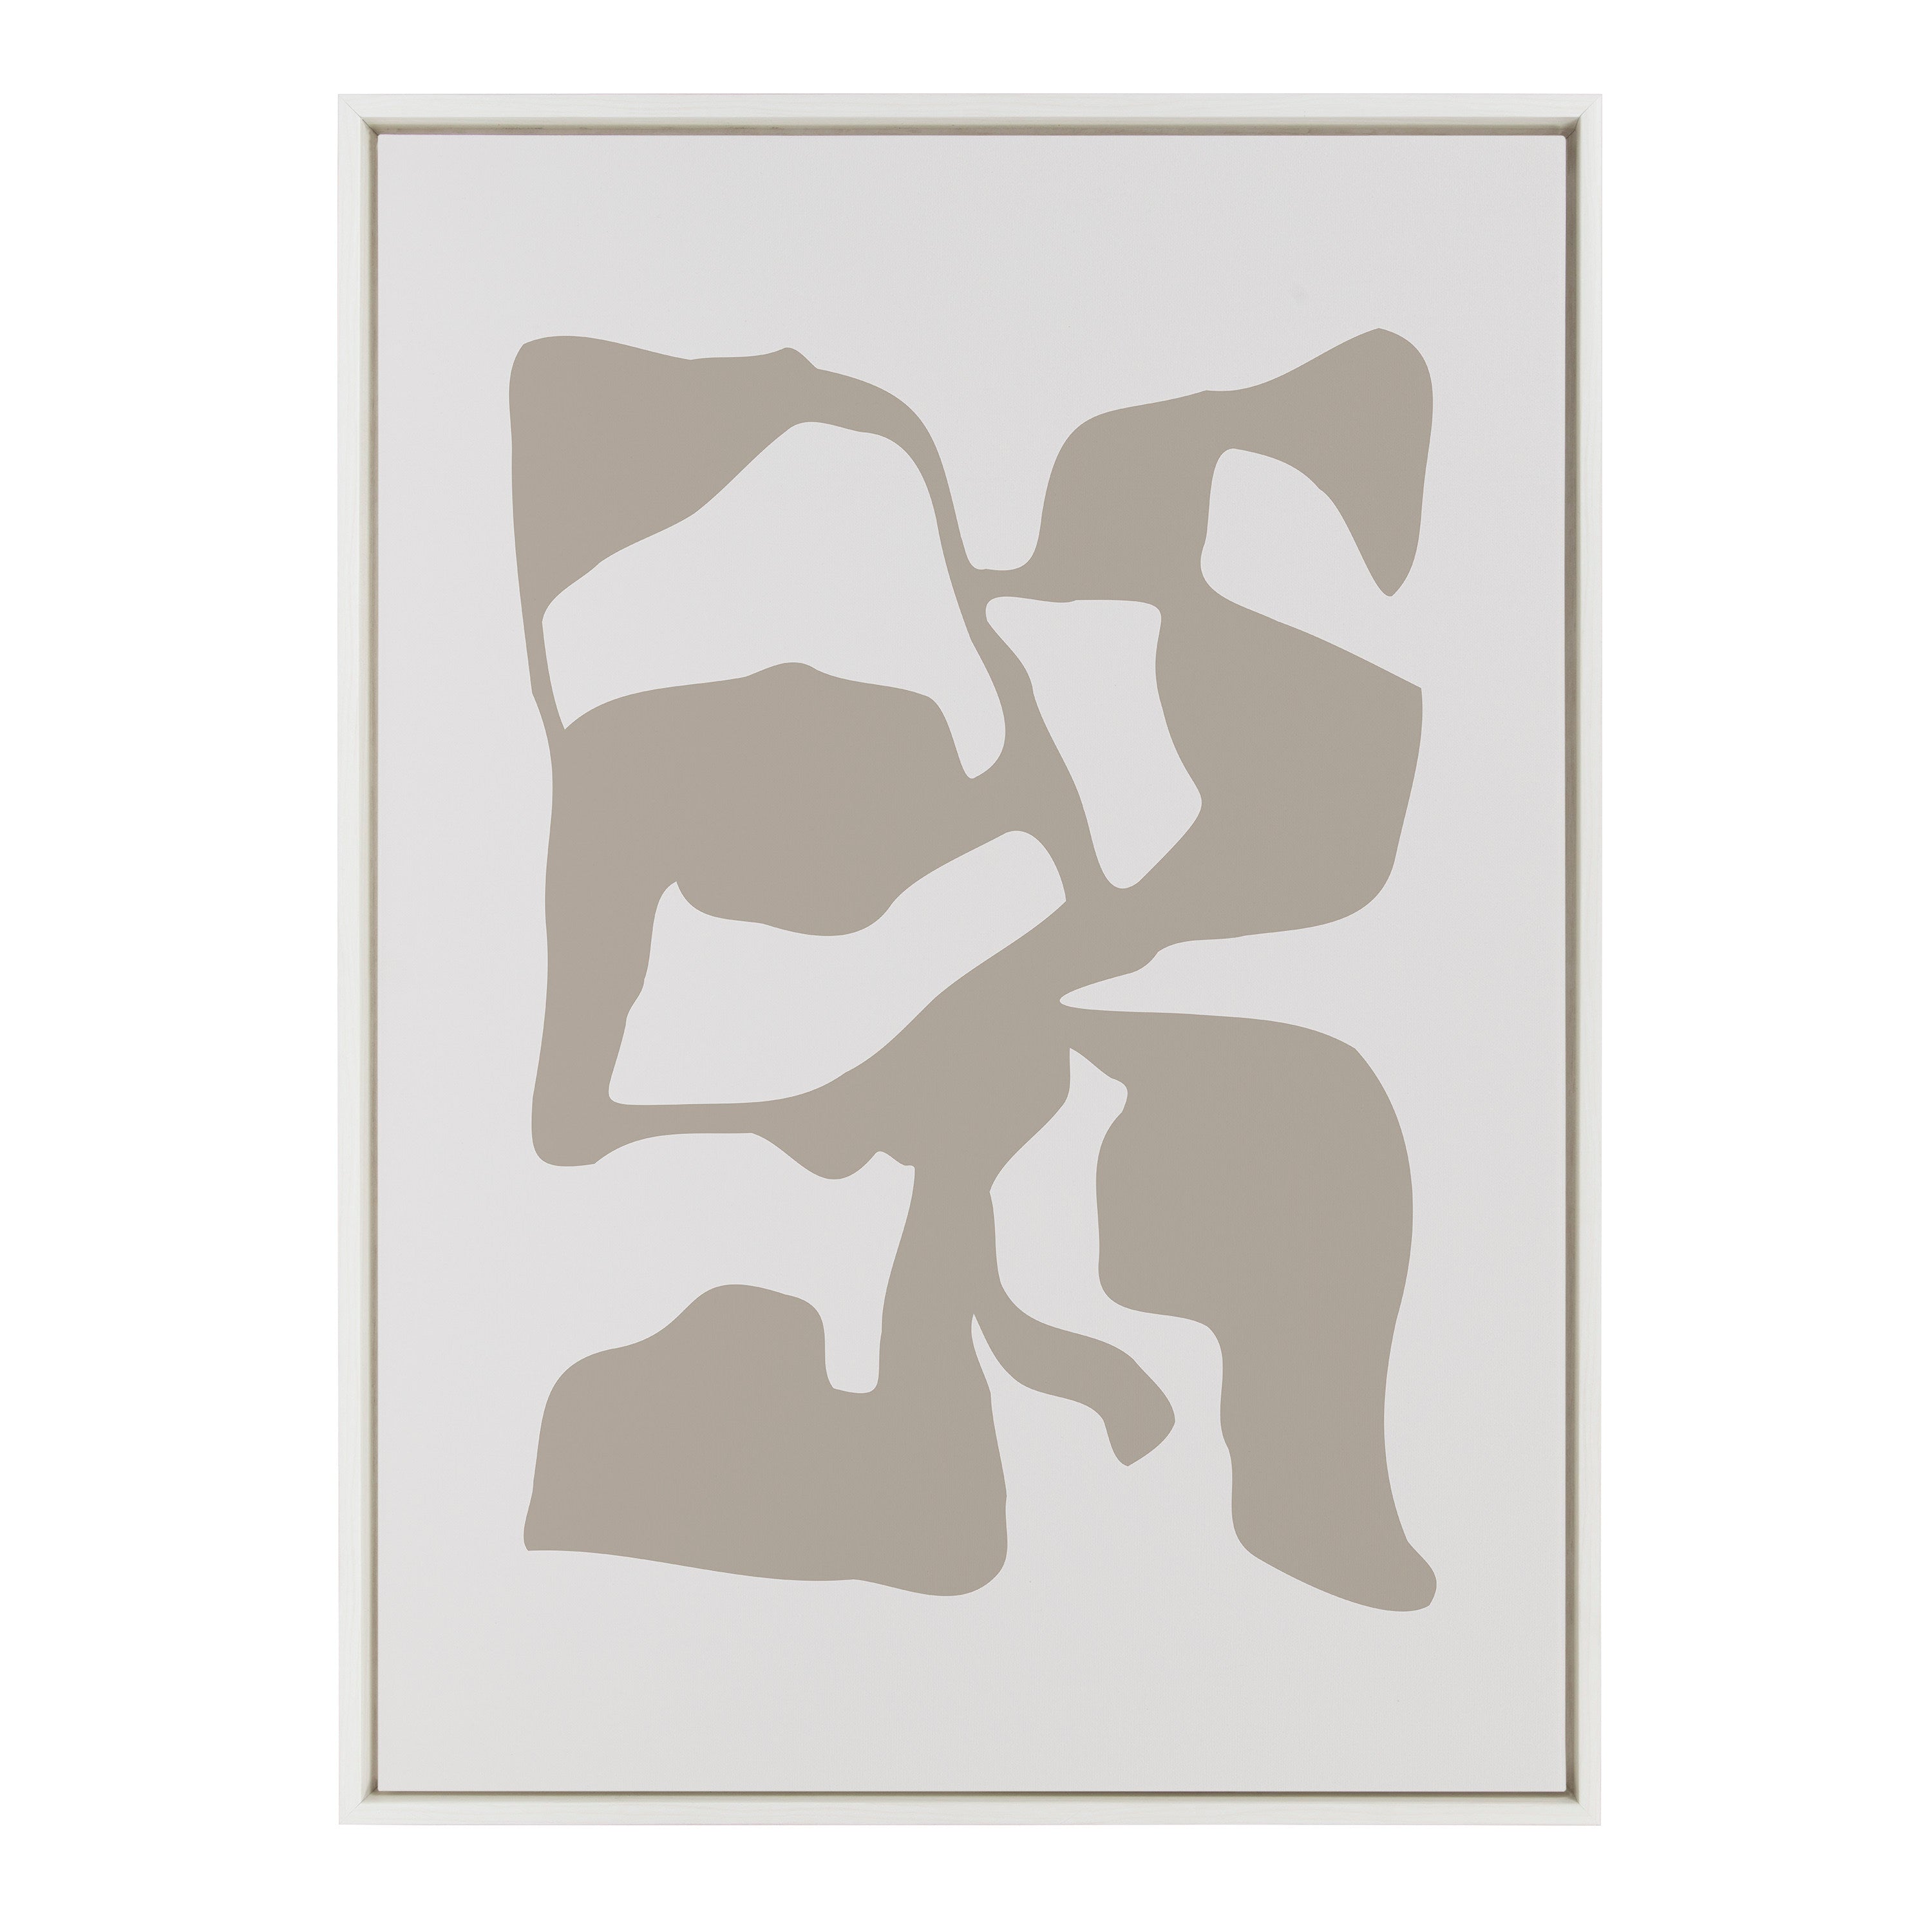 Sylvie Distorted Shapes of Tan and White Framed Canvas by The Creative Bunch Studio